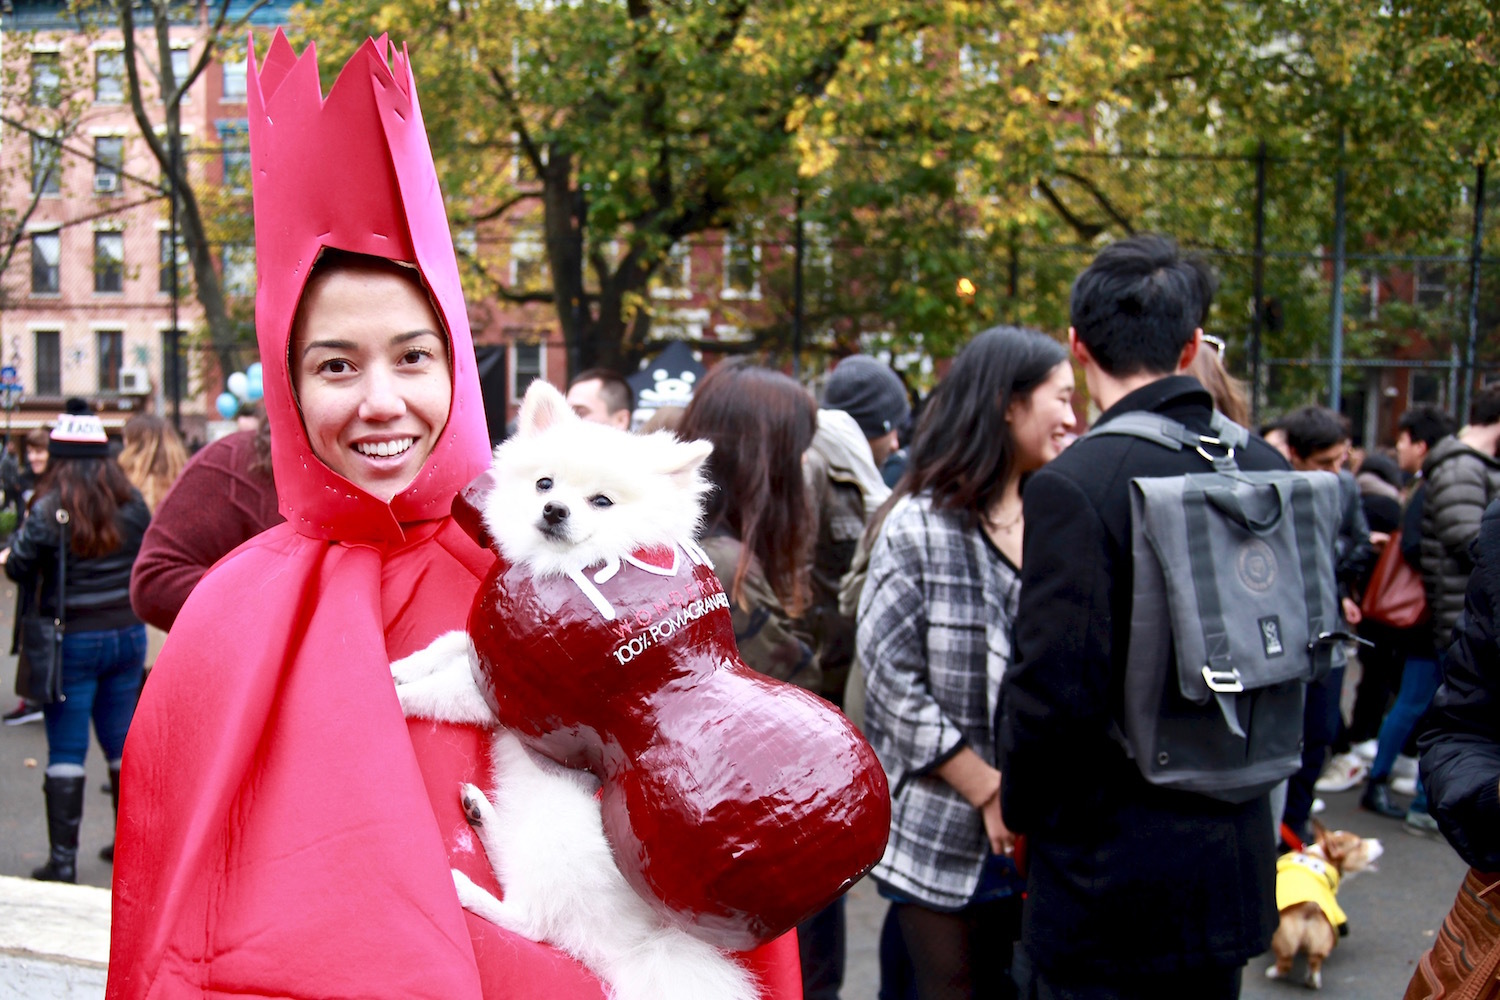 Photos from the Halloween Dog Parade, a Stunning Parade of Dogs Broadly